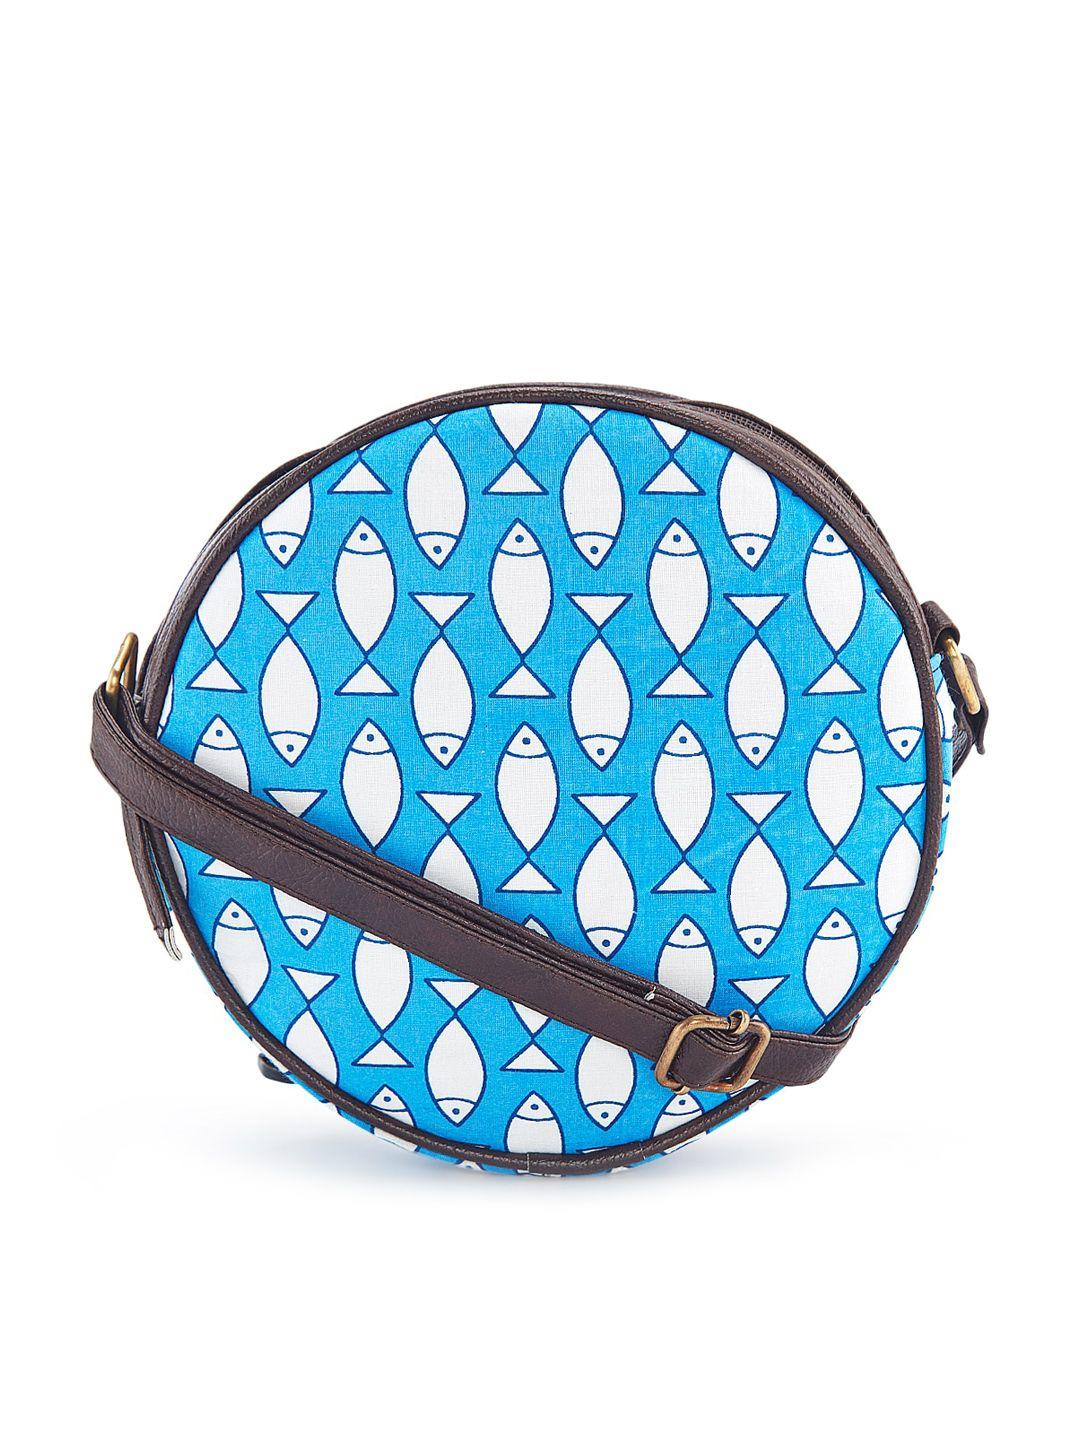 nepri graphic printed structured cotton sling bag